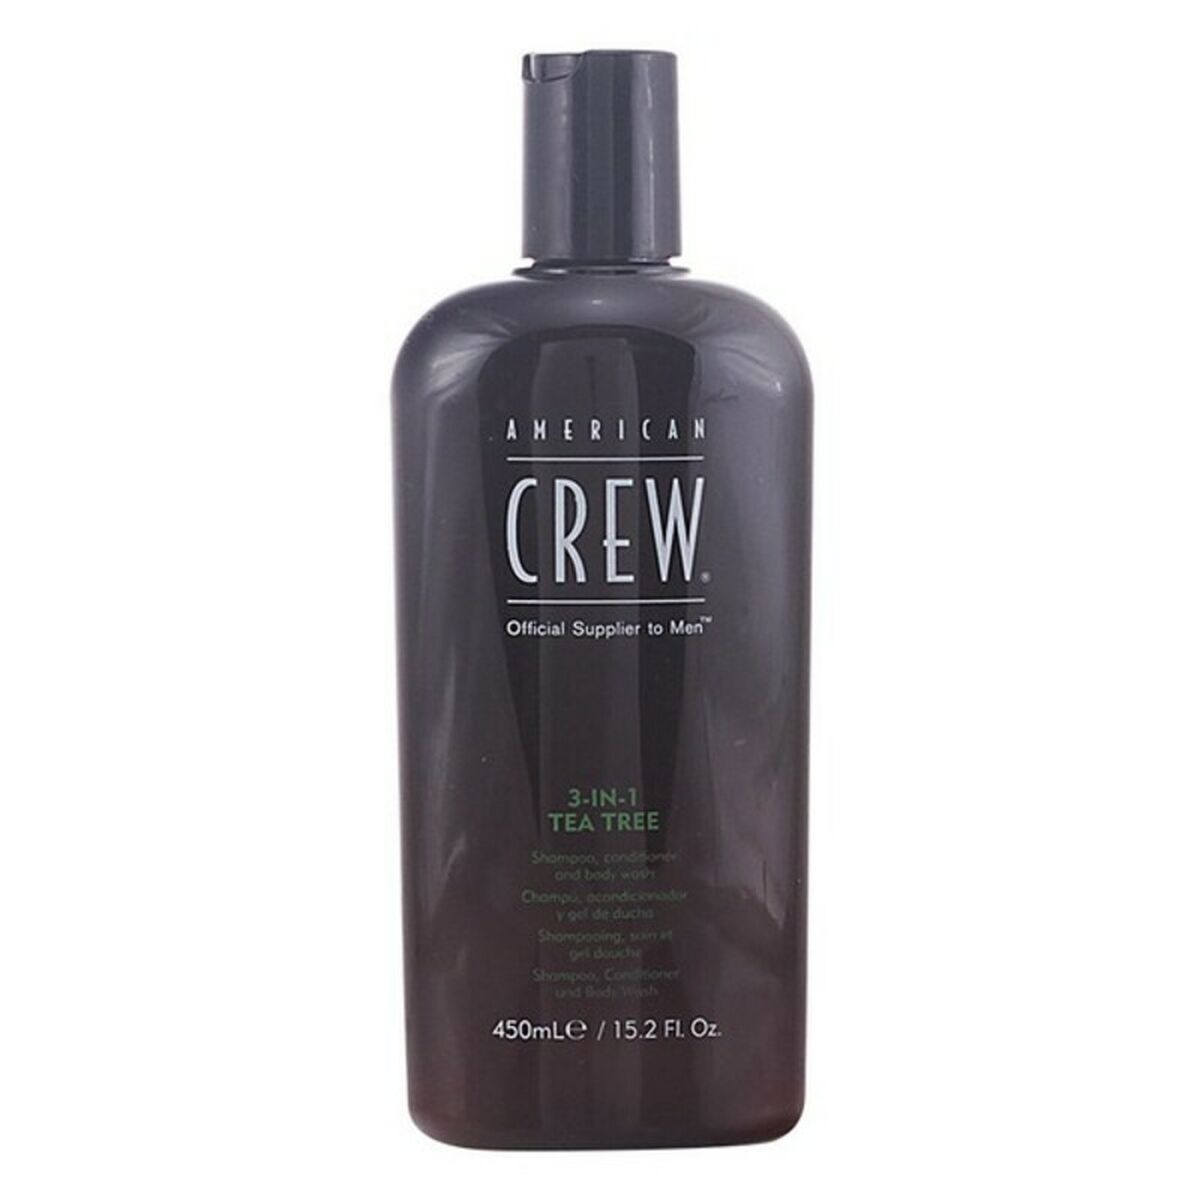 2-in-1 shampooing et après-shampooing Tea Tree American Crew (450 ml)